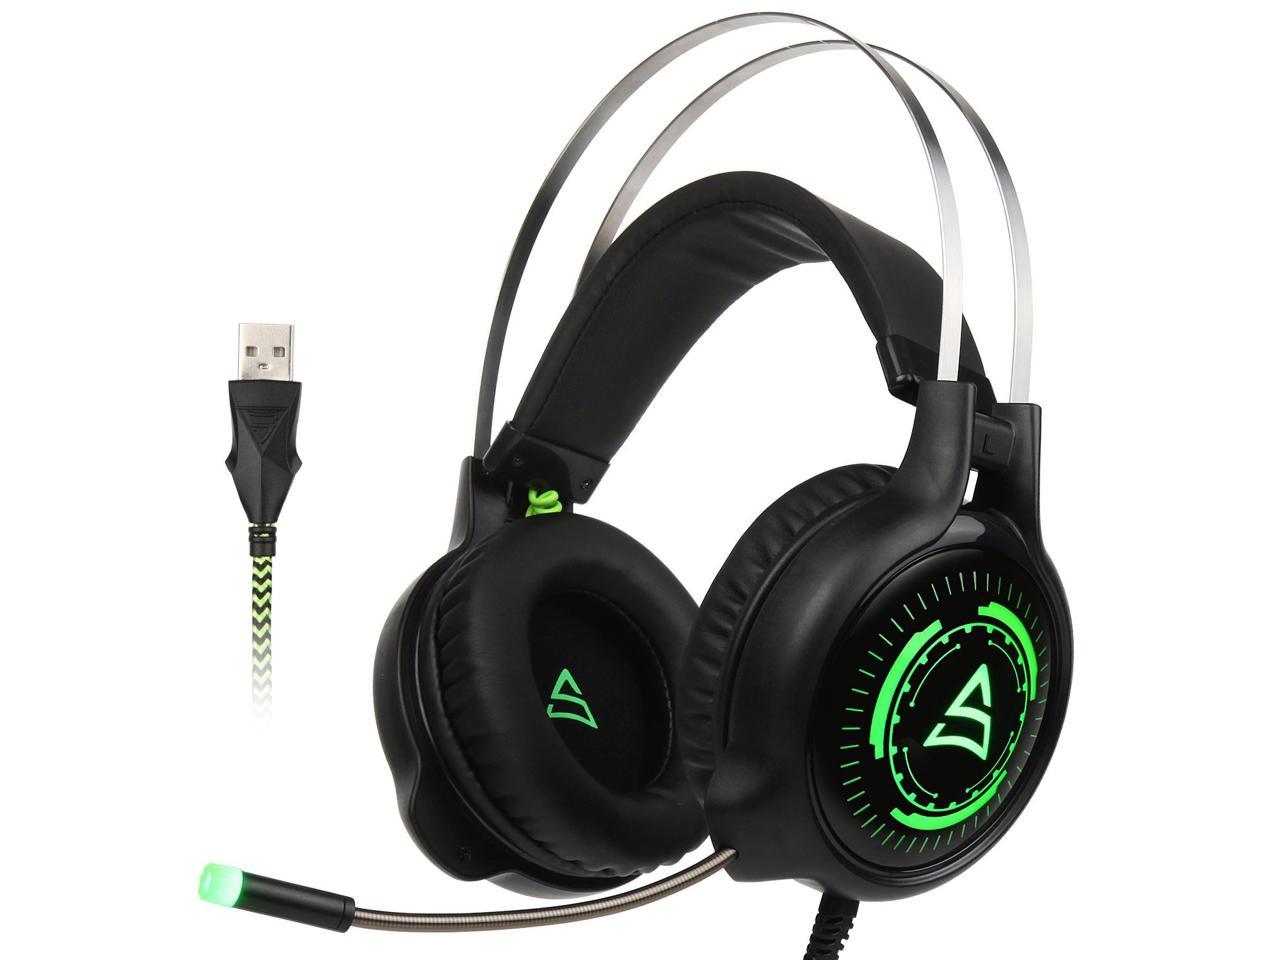 Supsoo G815 Computer Gaming Headset LED Wired Headphones with Mic Volume Control for PC MAC Laptop Tablet